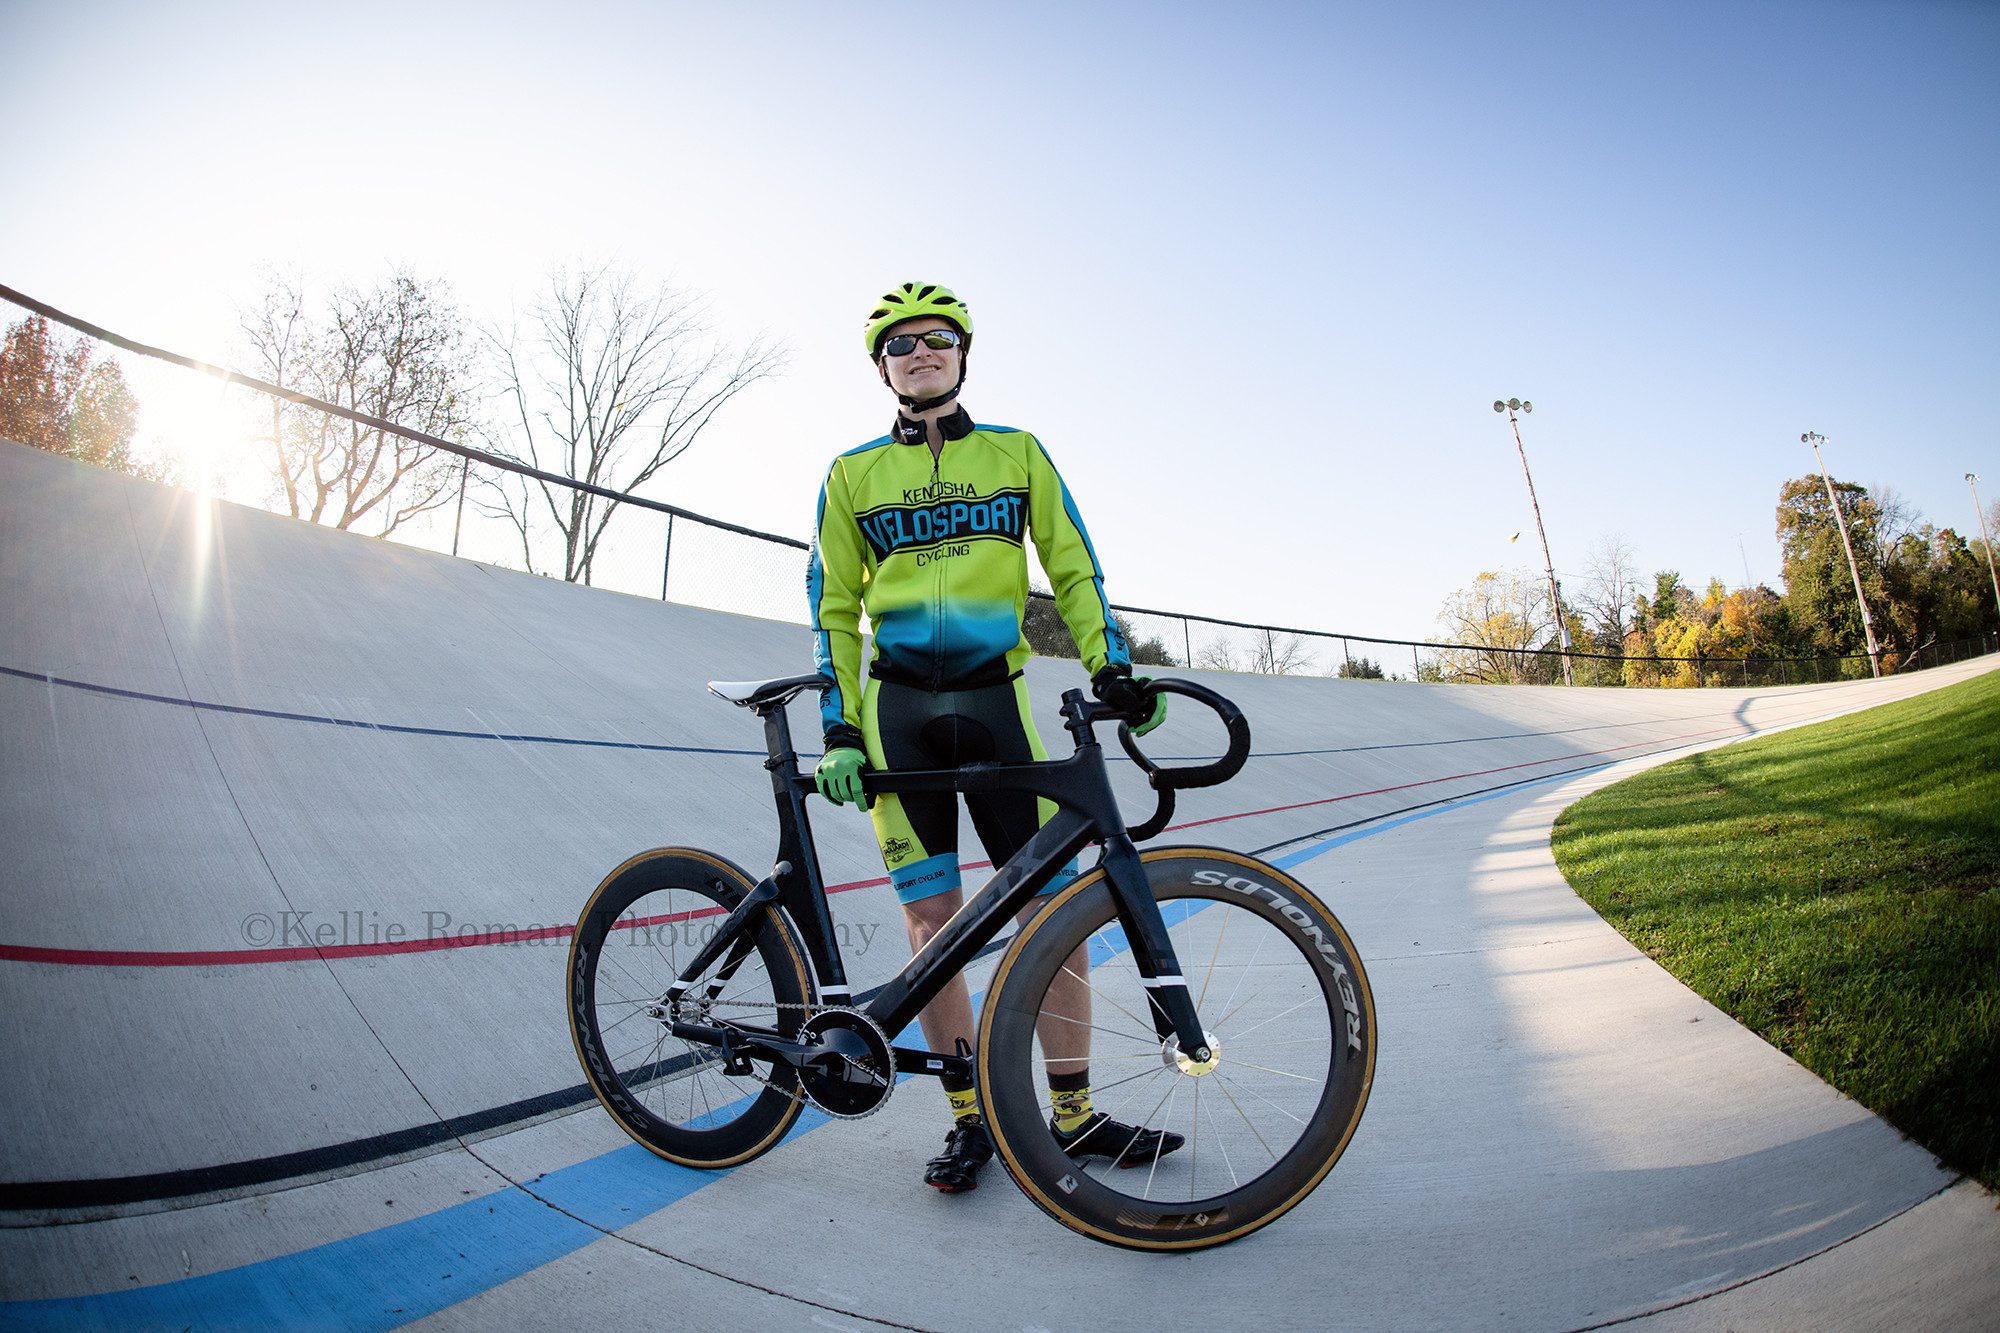 milwaukee photographer a high school senior guy is at the kenosha velodrome with his cycling uniform on he's standing behind his bike on the cycling track he's looking at the camera and smiling the image is taken at a very wide angle